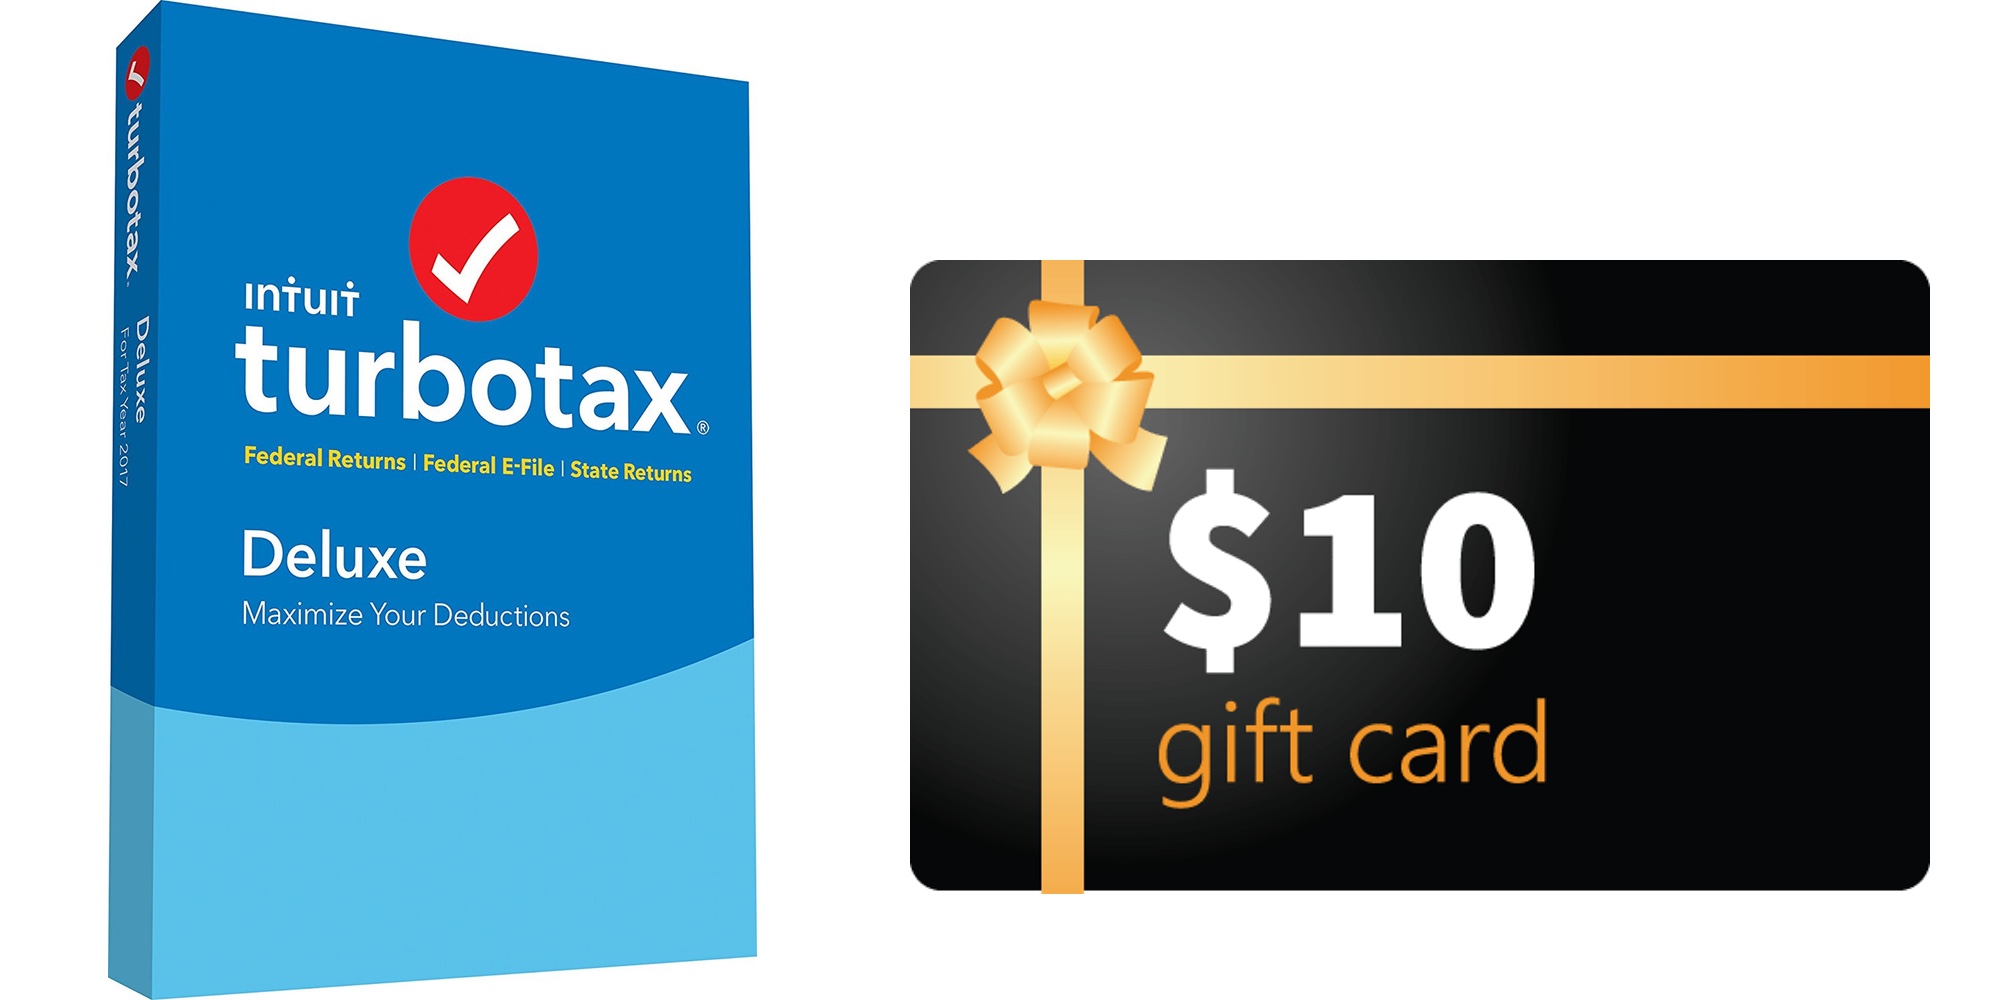 TurboTax Deluxe 2017 plus a 10 Gift Card from Amazon, today only 50